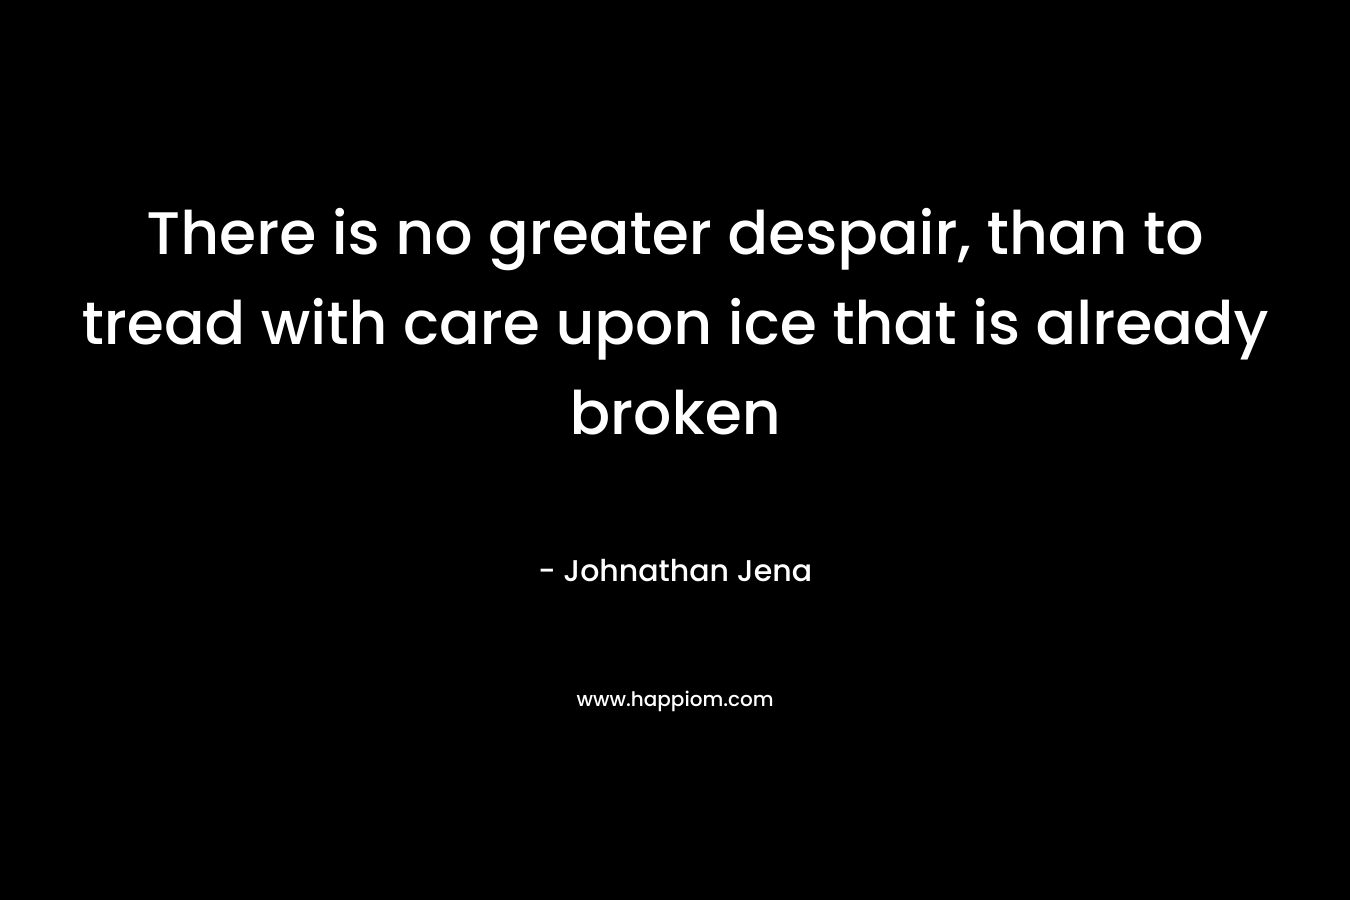 There is no greater despair, than to tread with care upon ice that is already broken